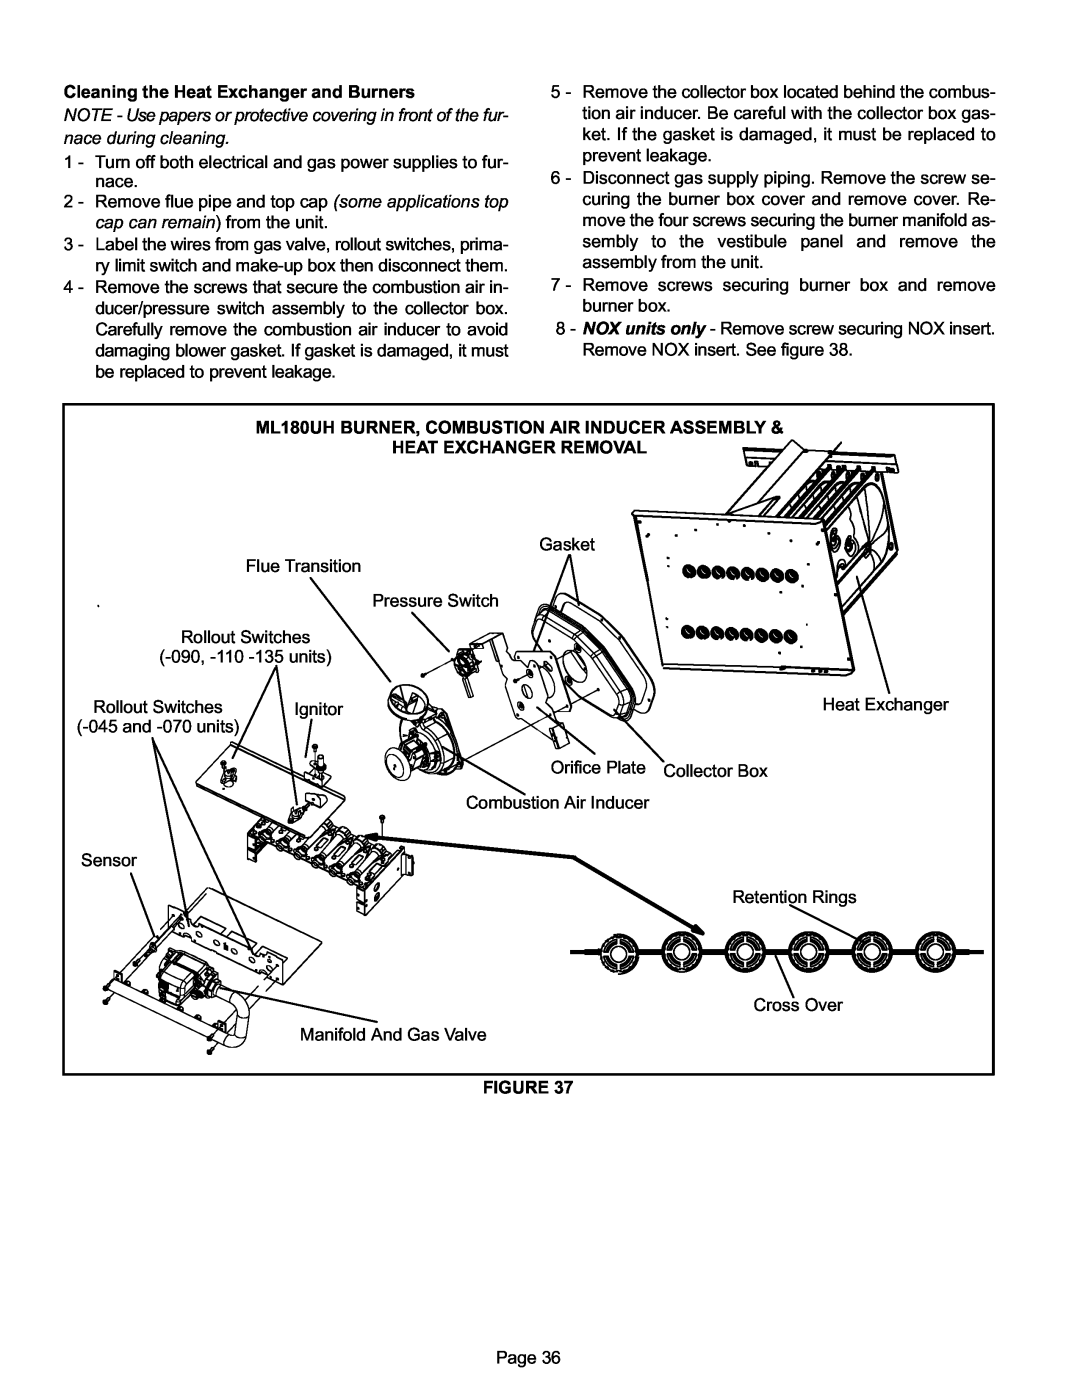 Lennox International Inc Merit Series Gas Furnace installation instructions Cleaning the Heat Exchanger and Burners 